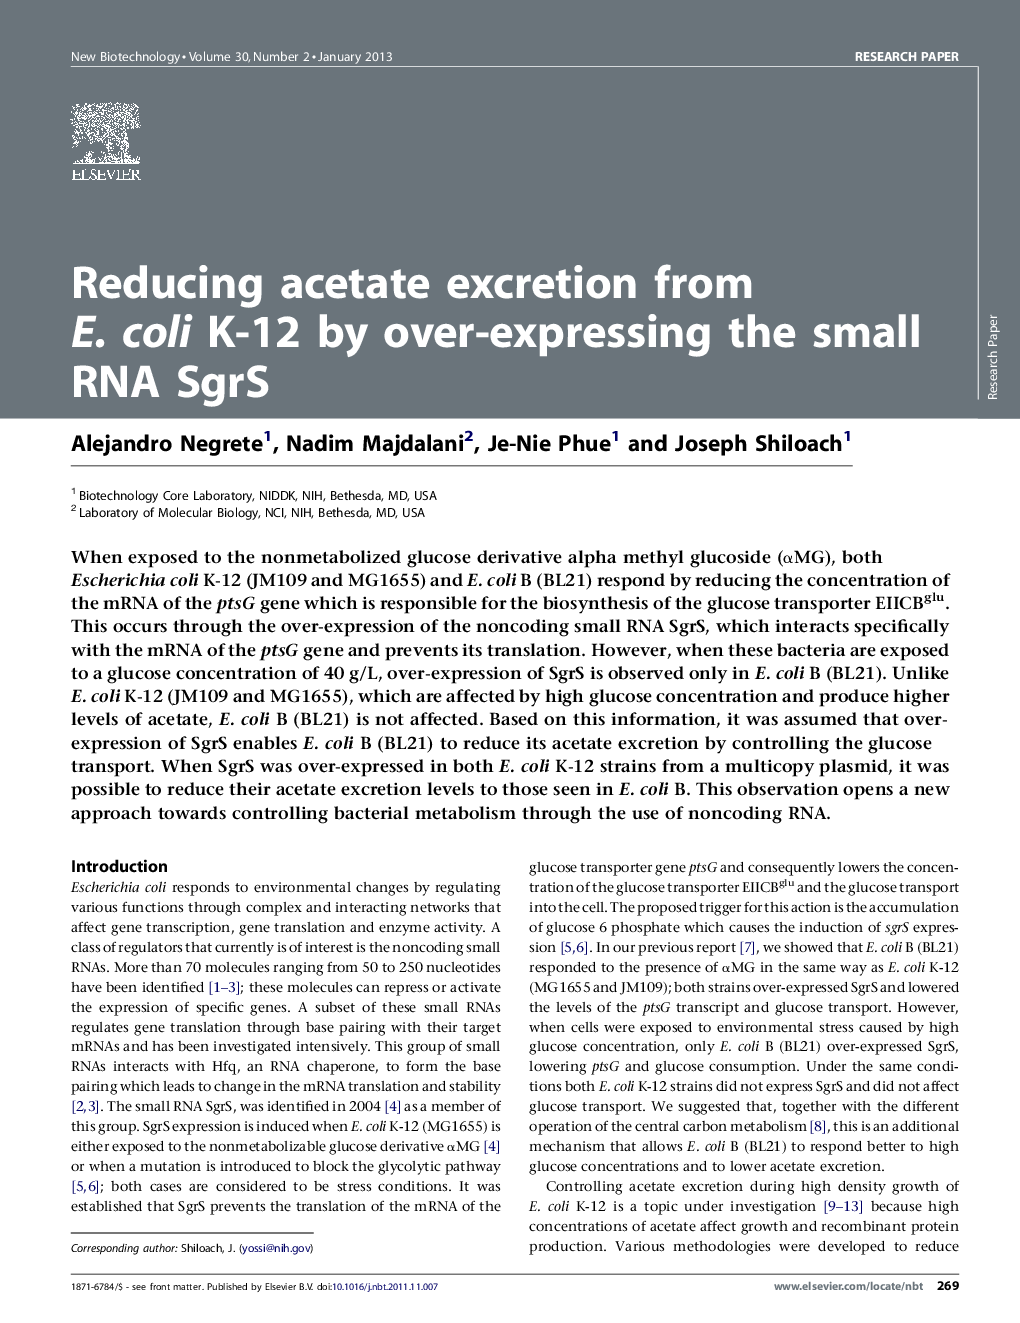 Reducing acetate excretion from E. coli K-12 by over-expressing the small RNA SgrS